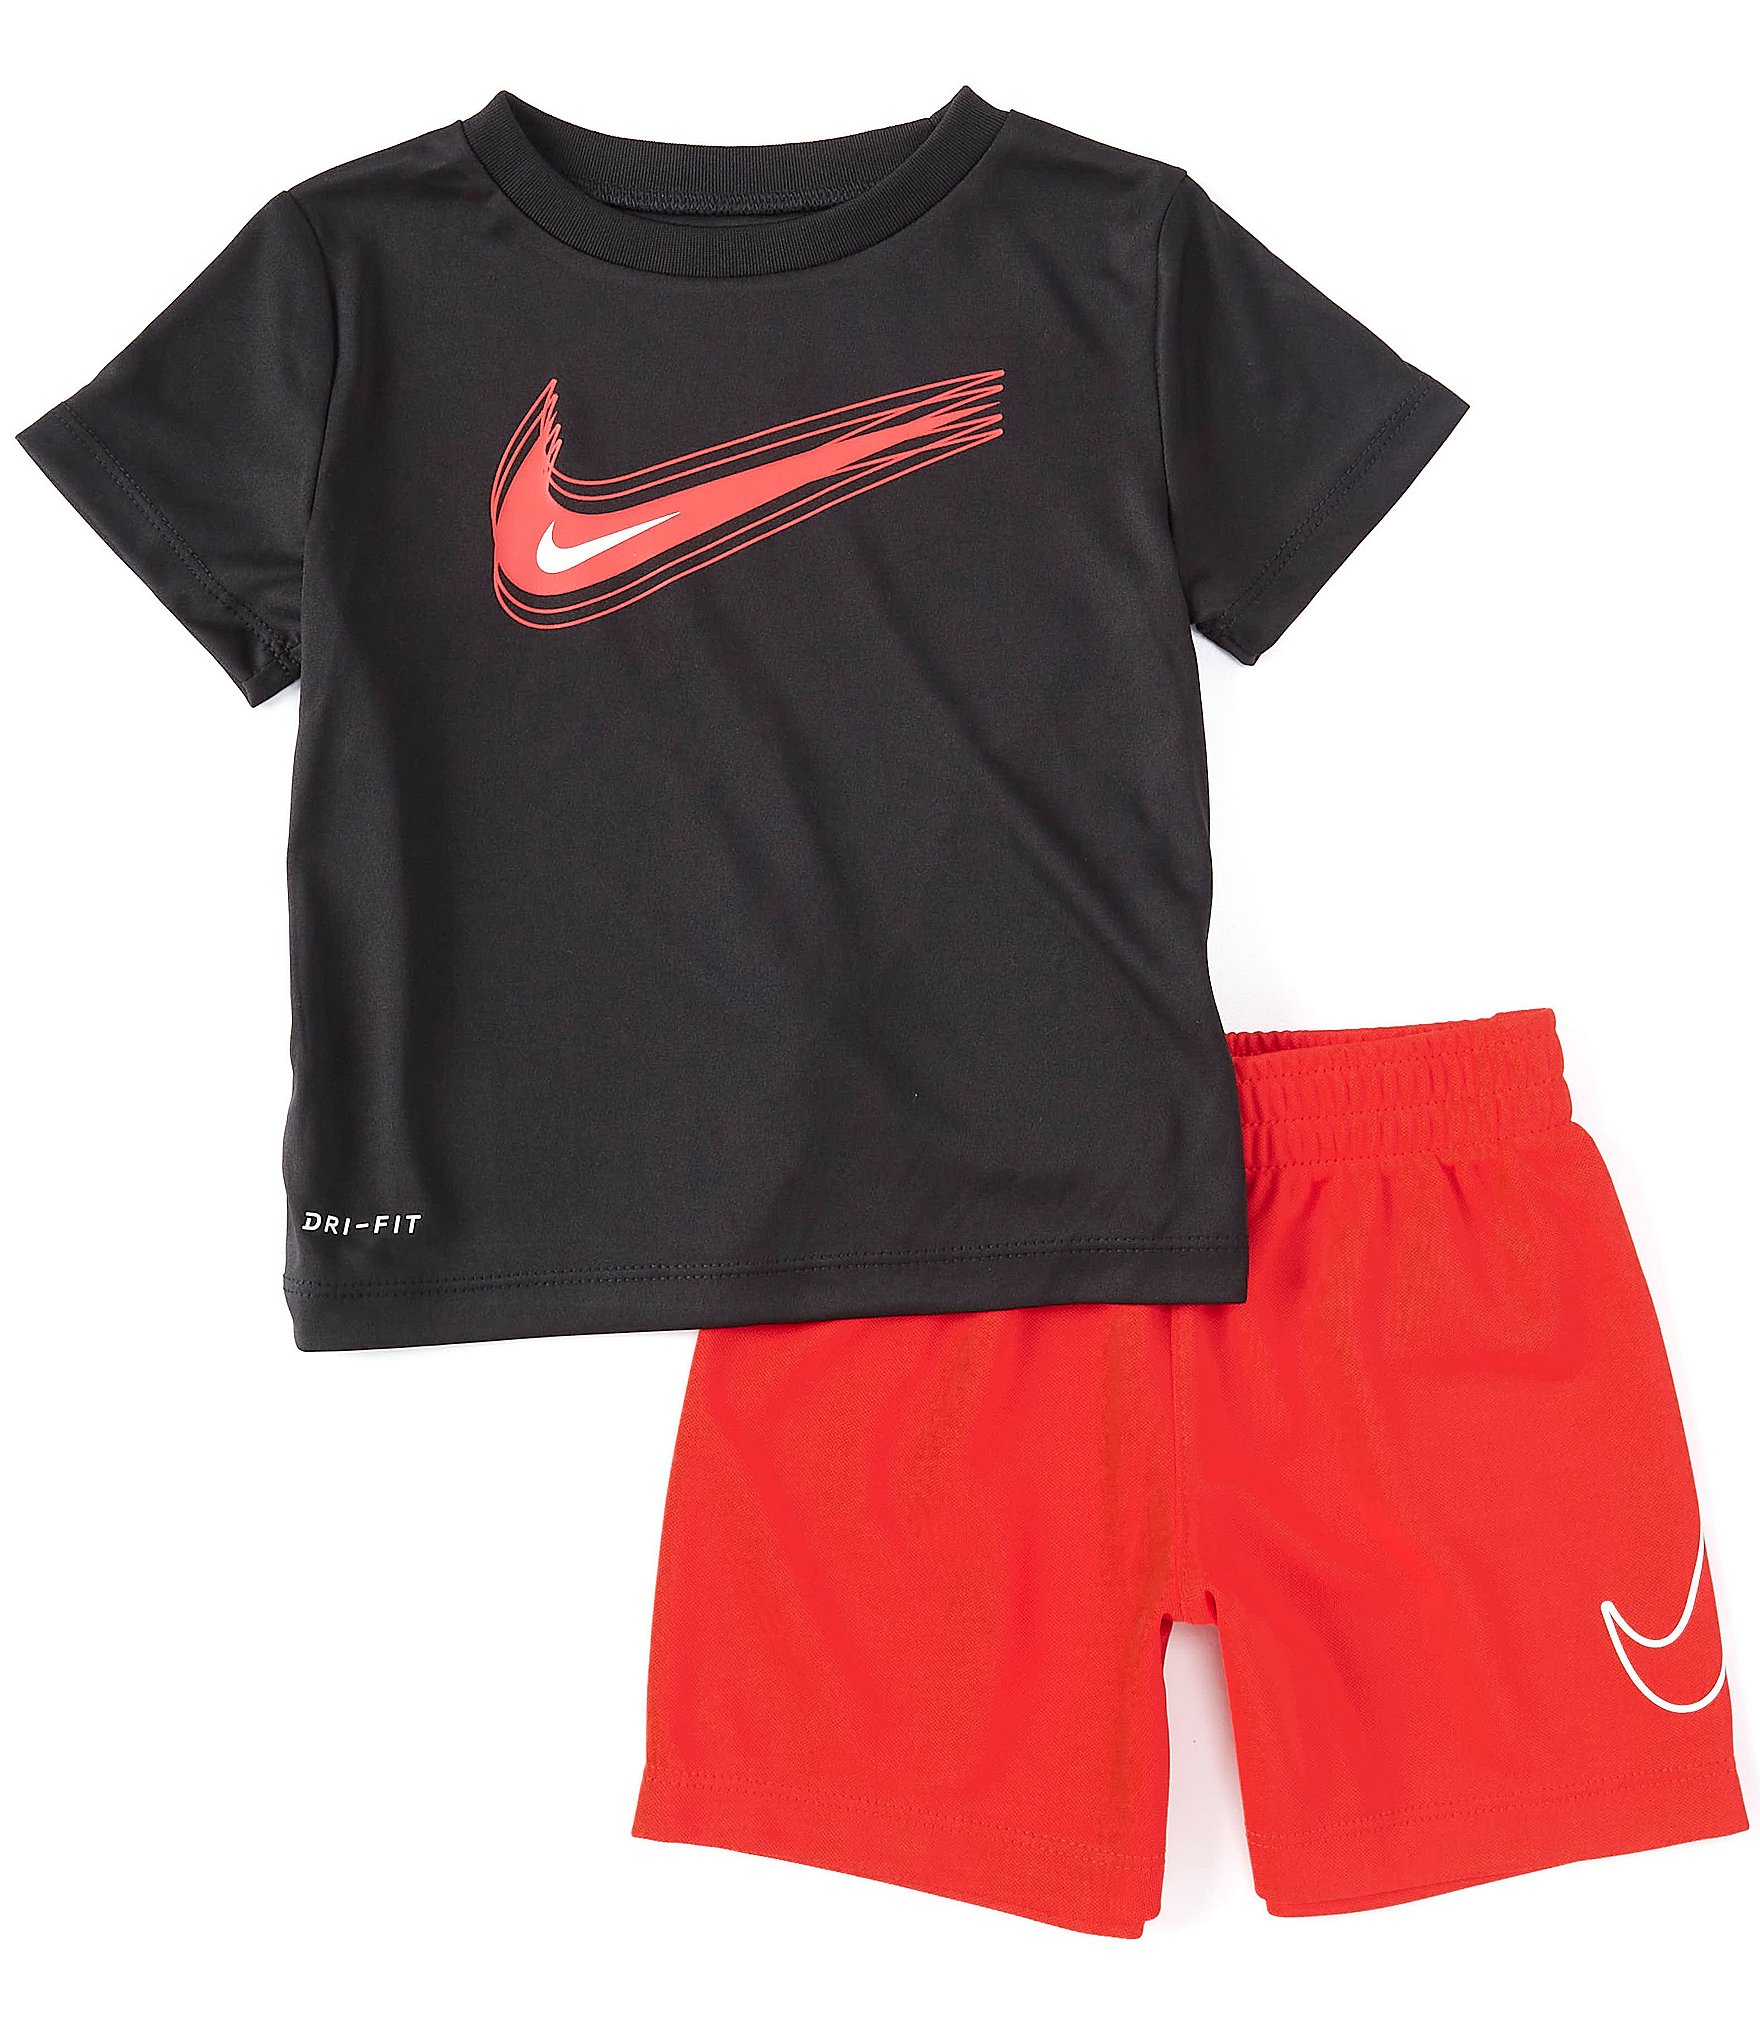 baby boy nike clothes sale